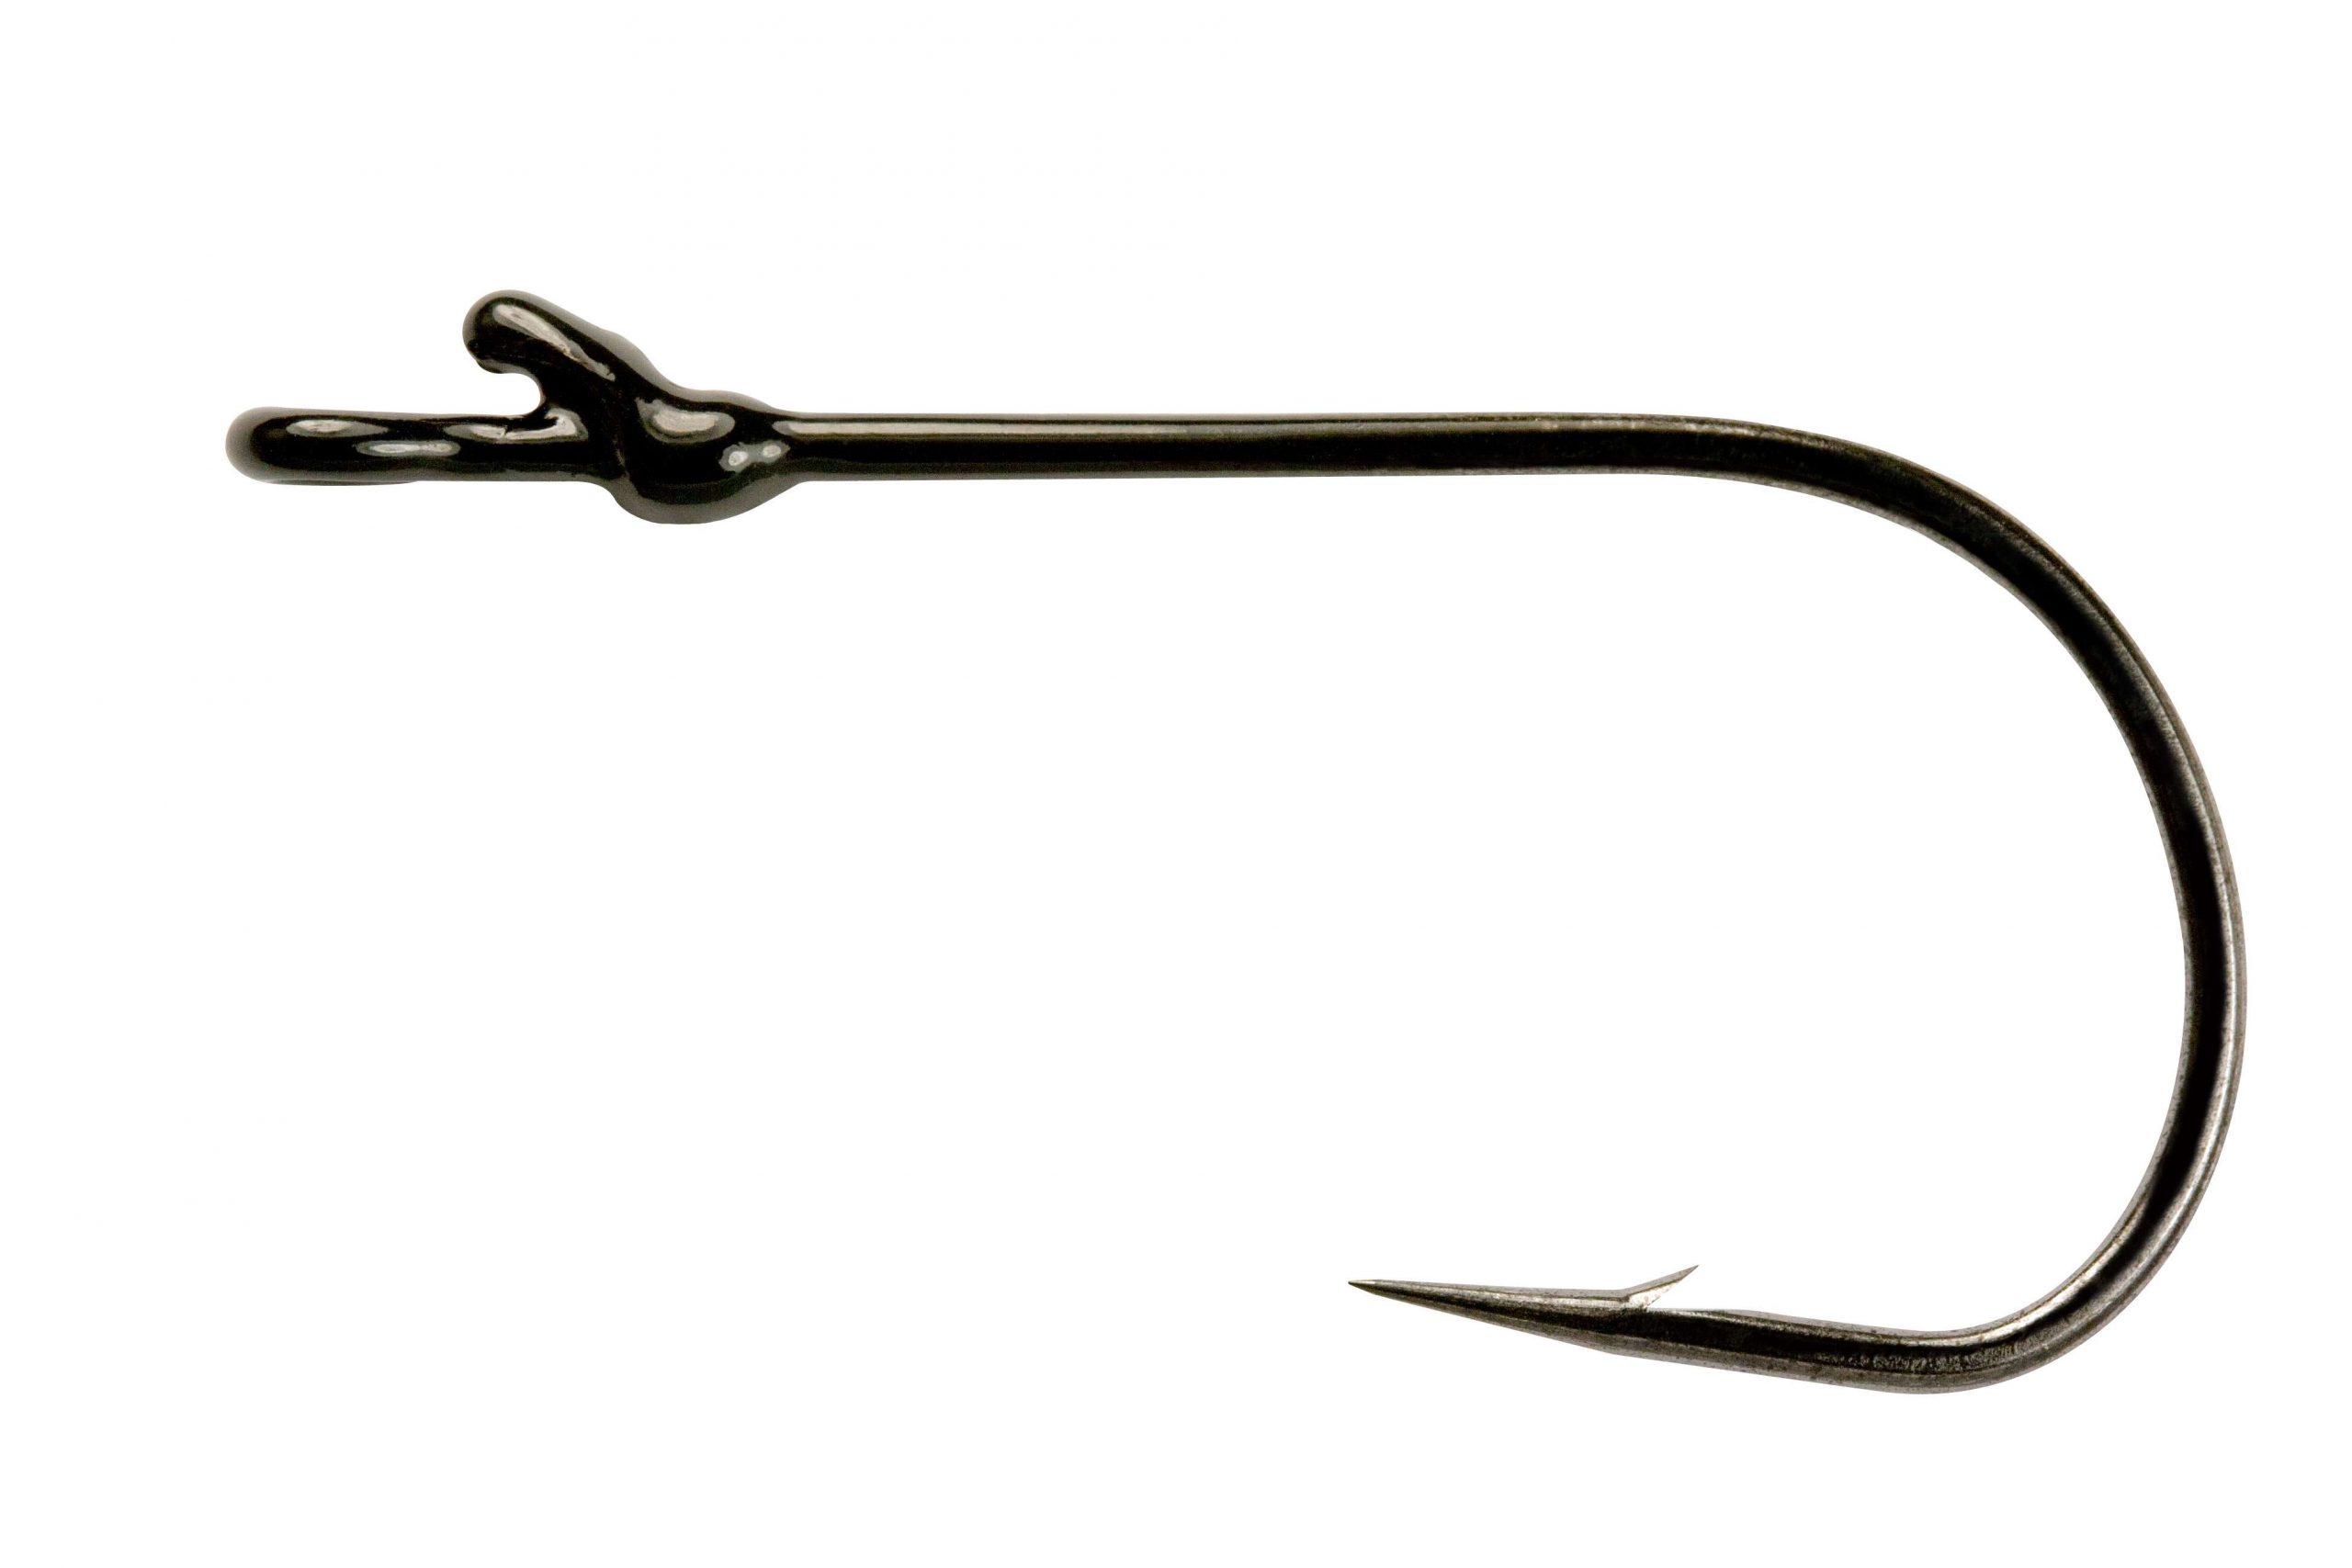 <B>MUSTAD GRIP-PIN EDGE</b>
Sick of your plastics slipping down the hook shank after a cast or simple retrieve? It will not happen if you are using the Grip-Pin series from this company. These hooks feature an oversize keeper that keeps plastics in place without affecting action. This new straight-shank finesse series is available in 1/0 and 2, which is perfect for drop shotting and split shotting tiny baits.